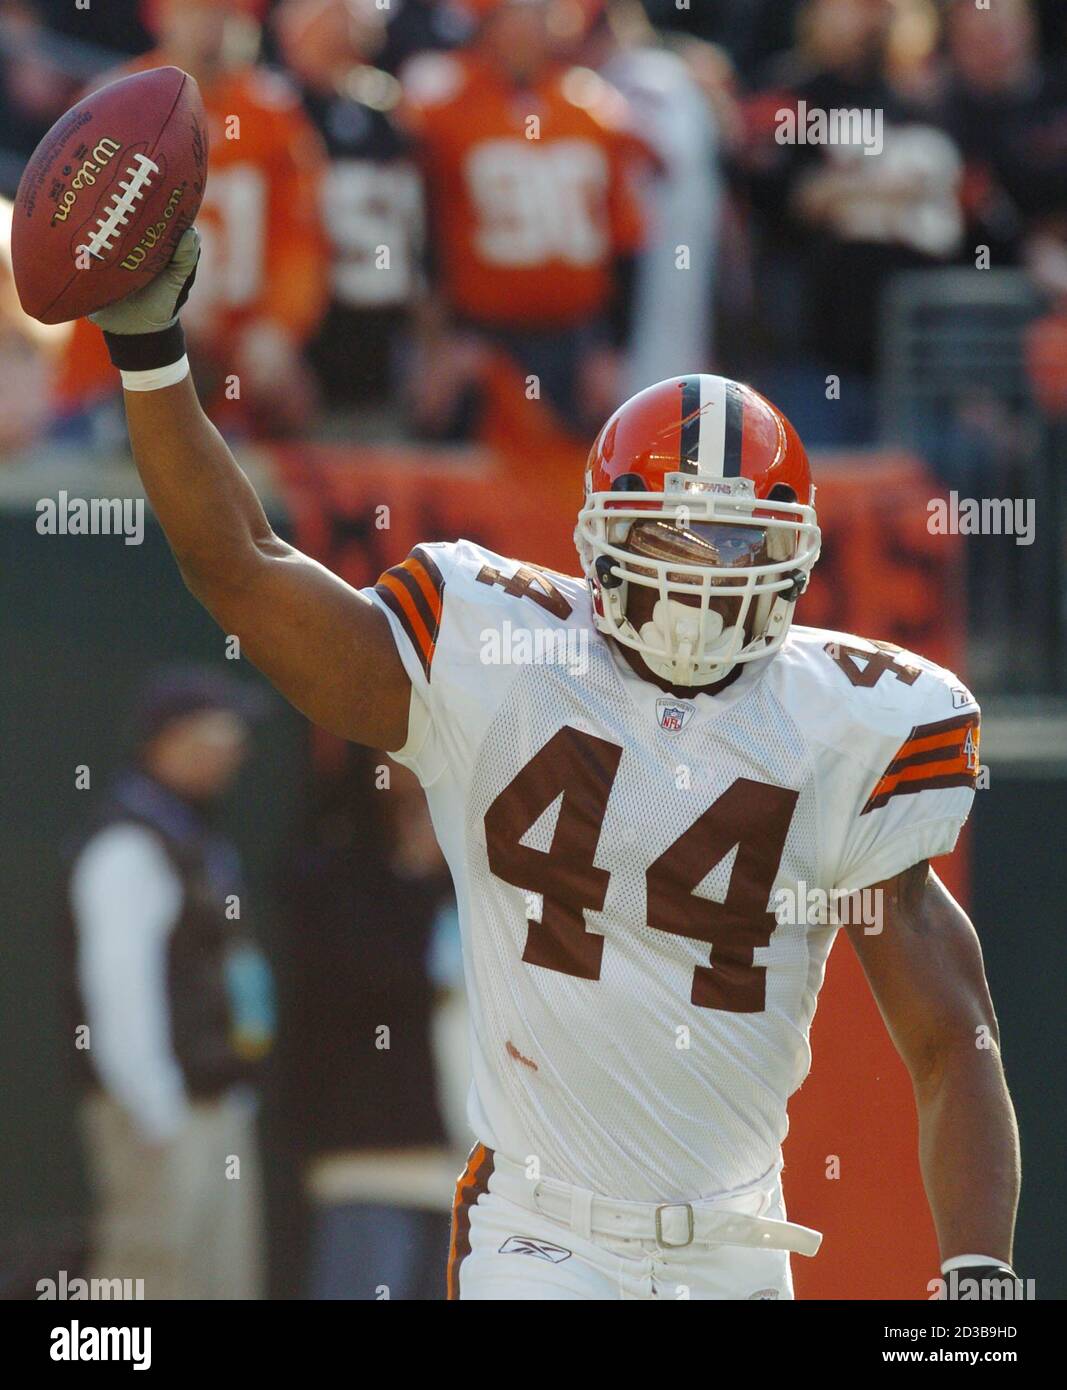 Cleveland Browns running back Lee Suggs celebrates after scoring a  touchdown on a 78-yard run, during the second quarter of their NFL game  against the Cincinnati Bengals, in Cincinnati, December 28, 2003.